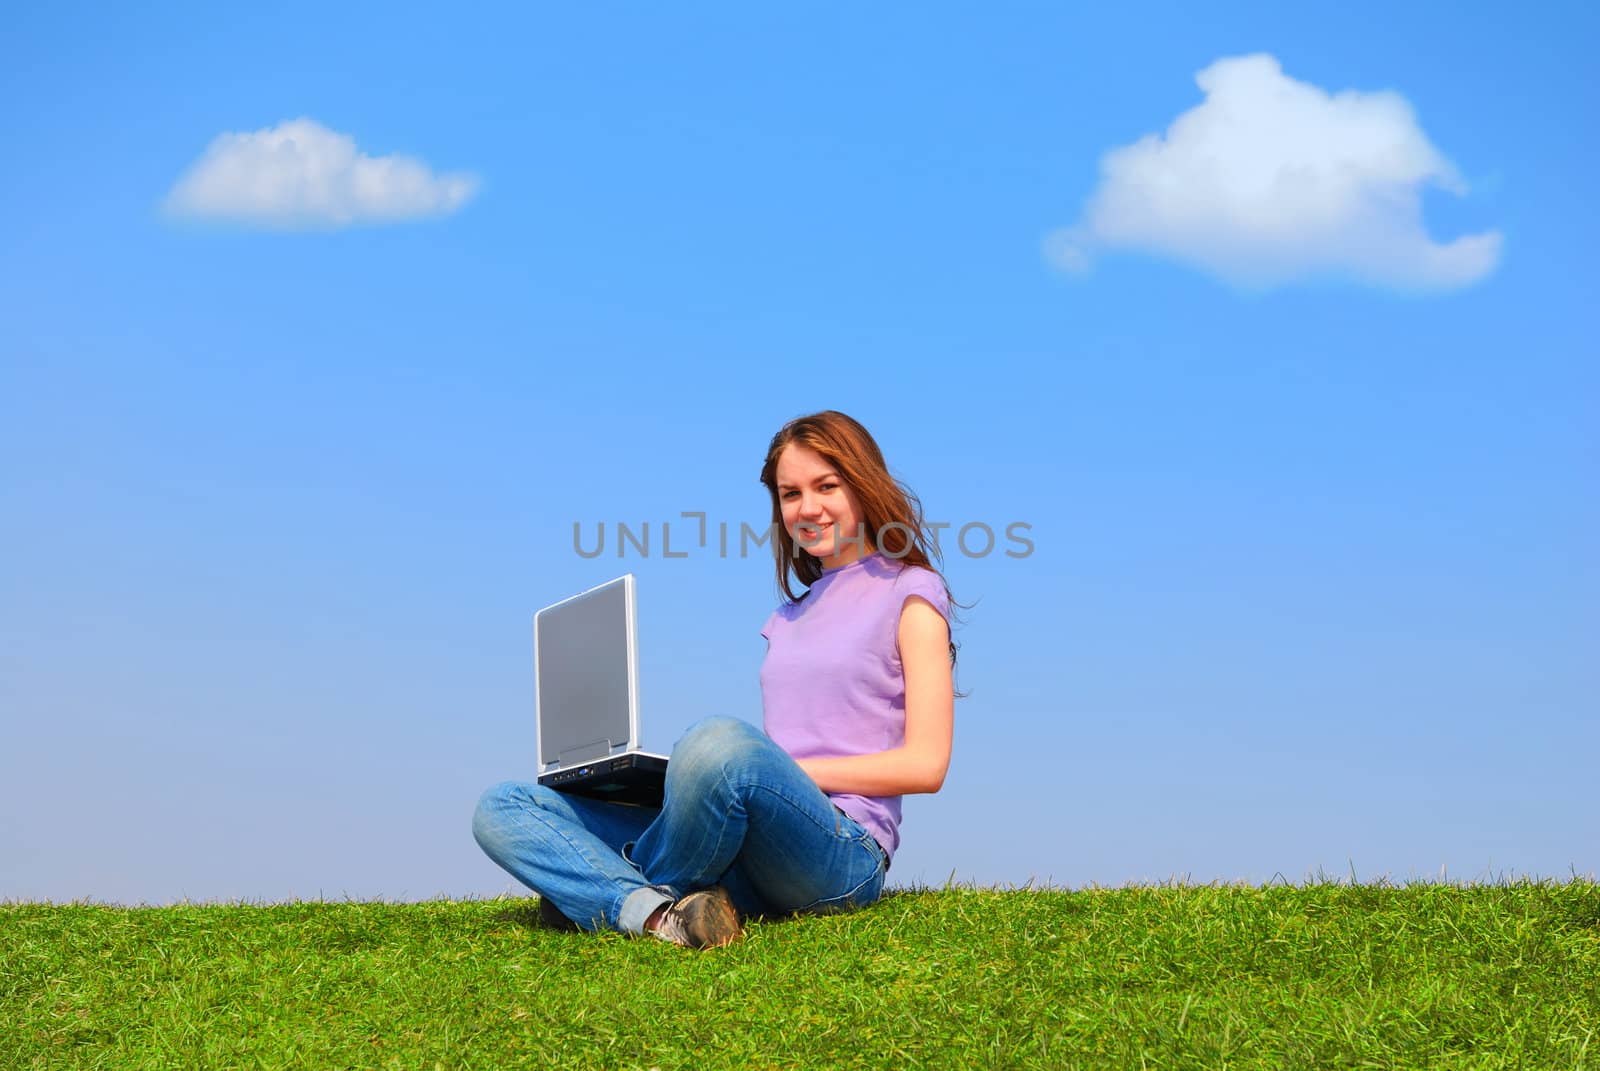 Girl with notebook sitting on grass against sky                                      